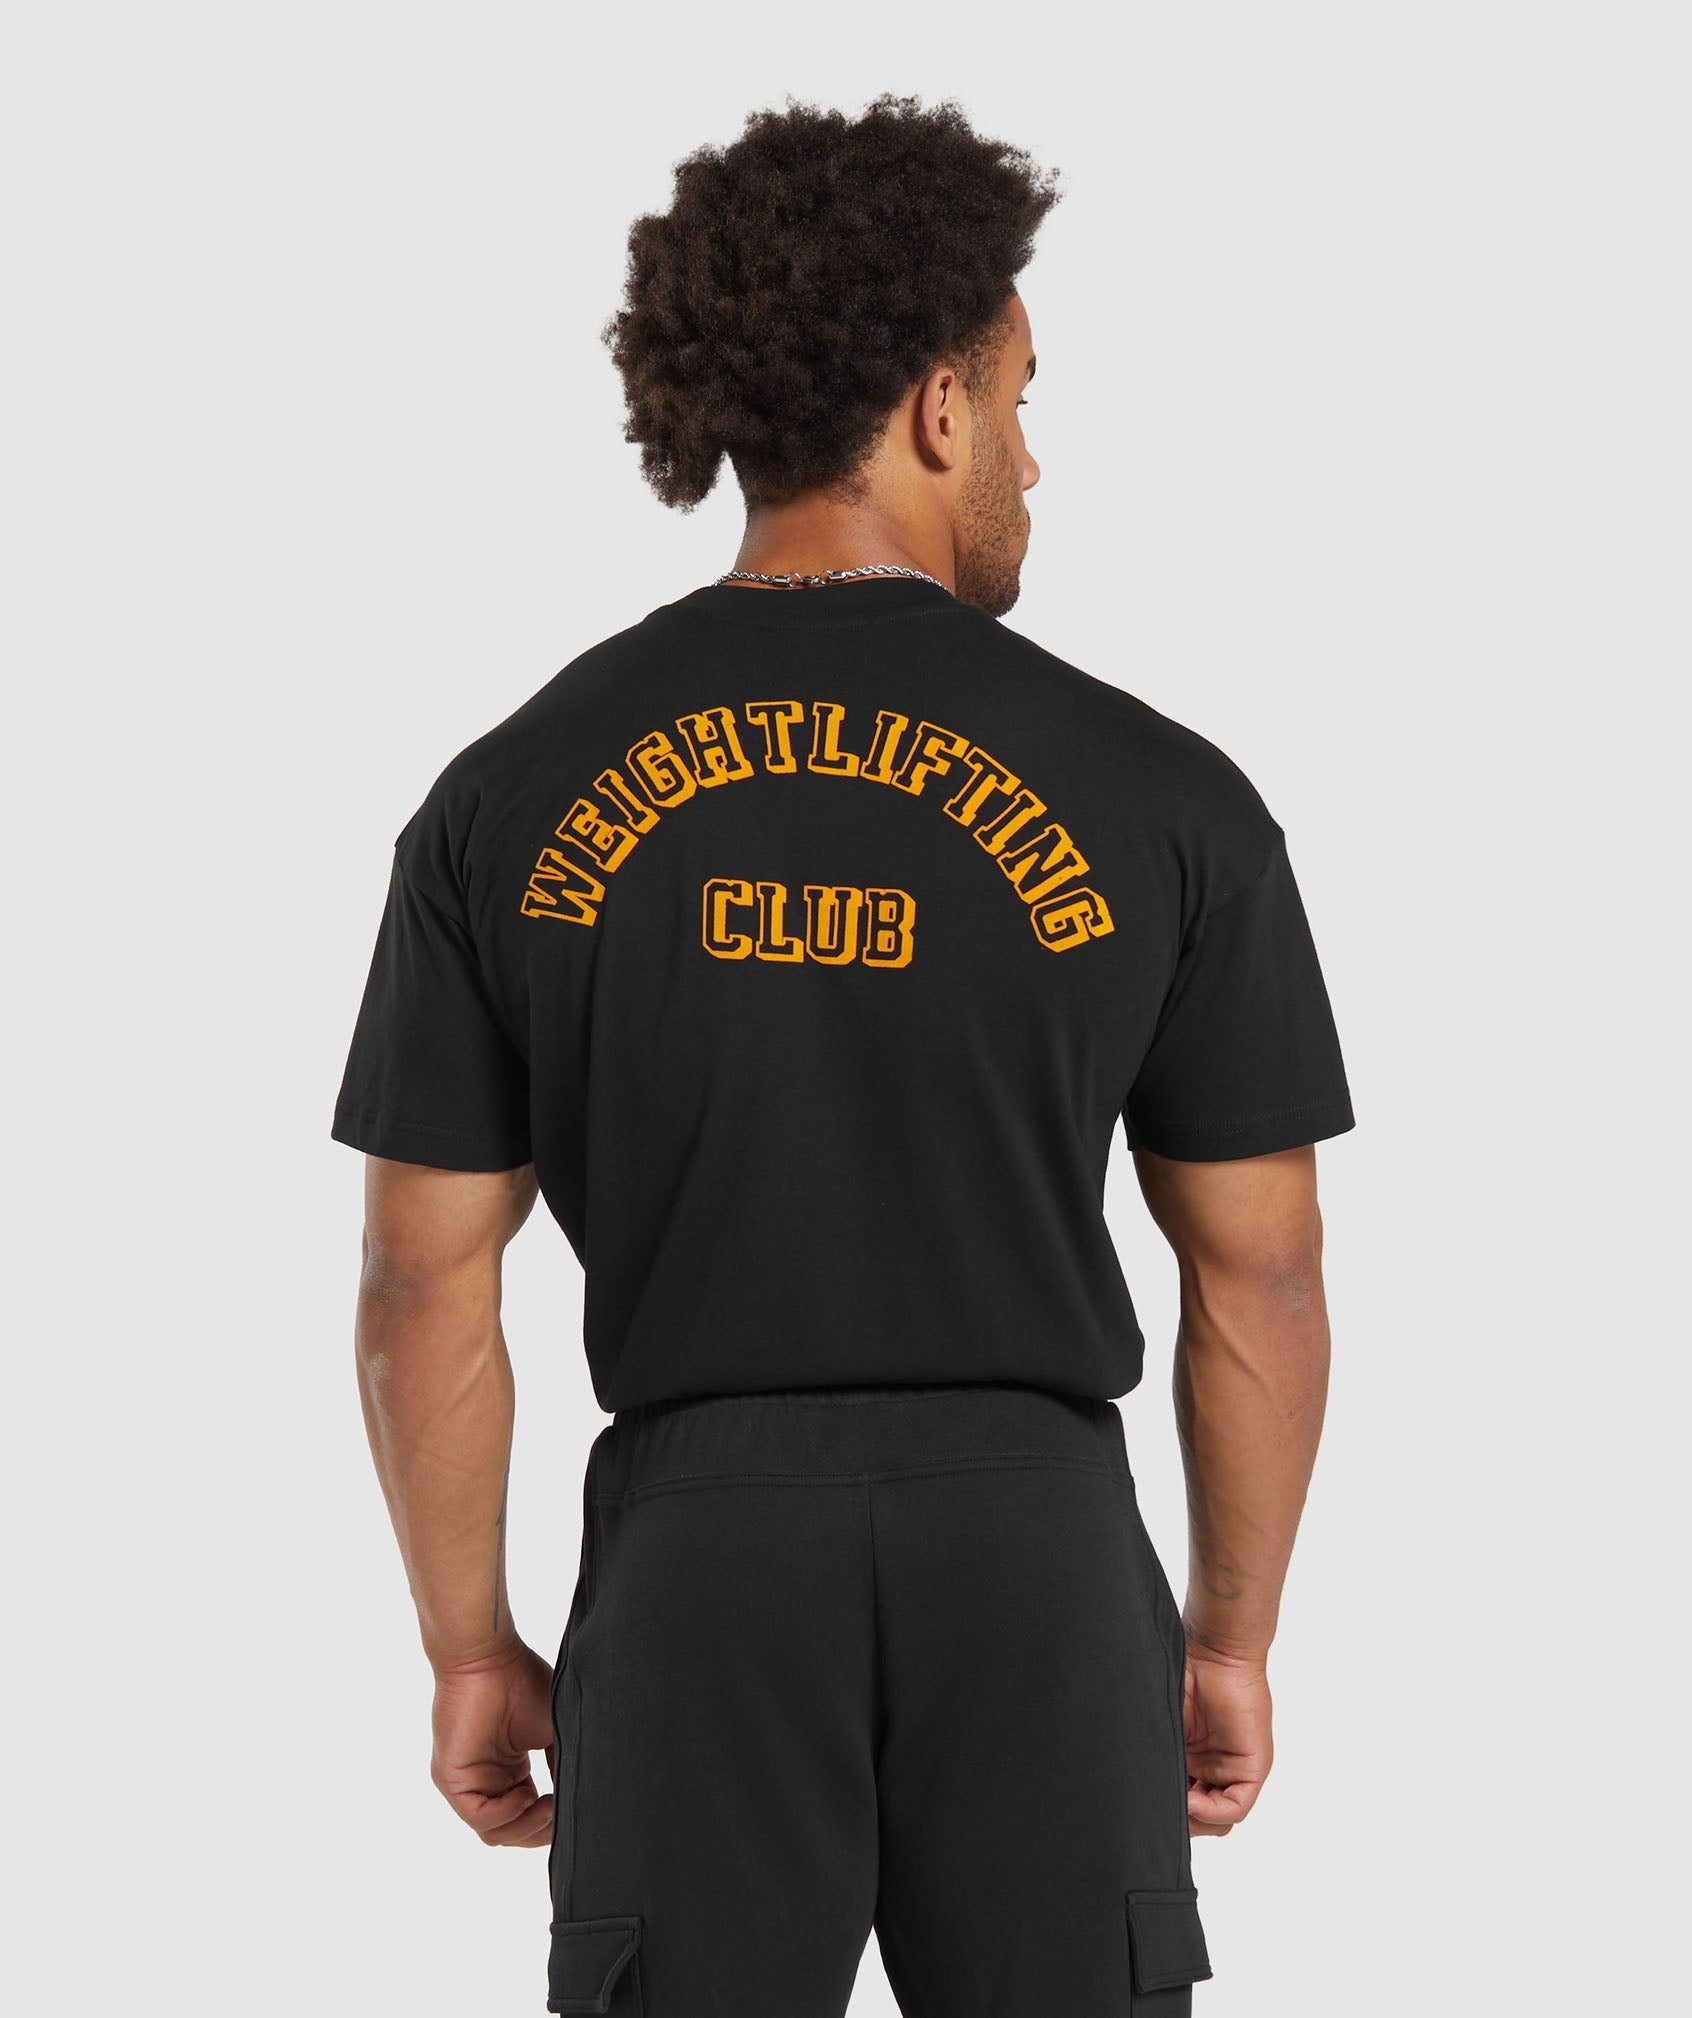 Weightlifting Club T-Shirt product image 1